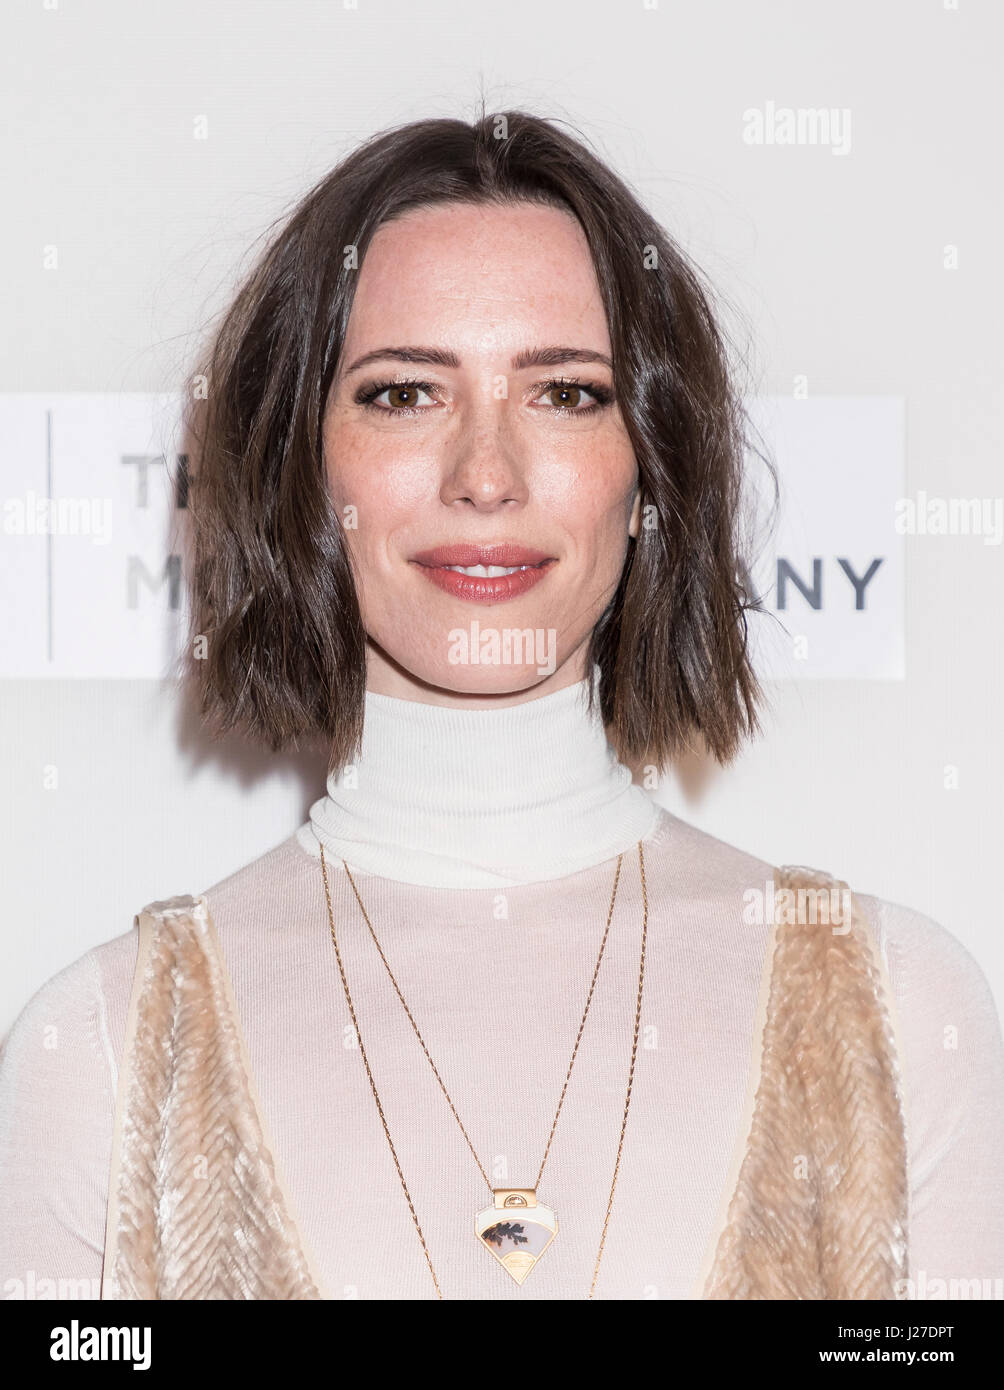 New York, USA. 24th Apr, 2017. Actress Rebecca Hall attends North American Premiere of THE DINNER during the 2017 Tribeca Film Festival at BNCC Tribeca PAC, Manhattan Credit: Sam Aronov/Alamy Live News Stock Photo